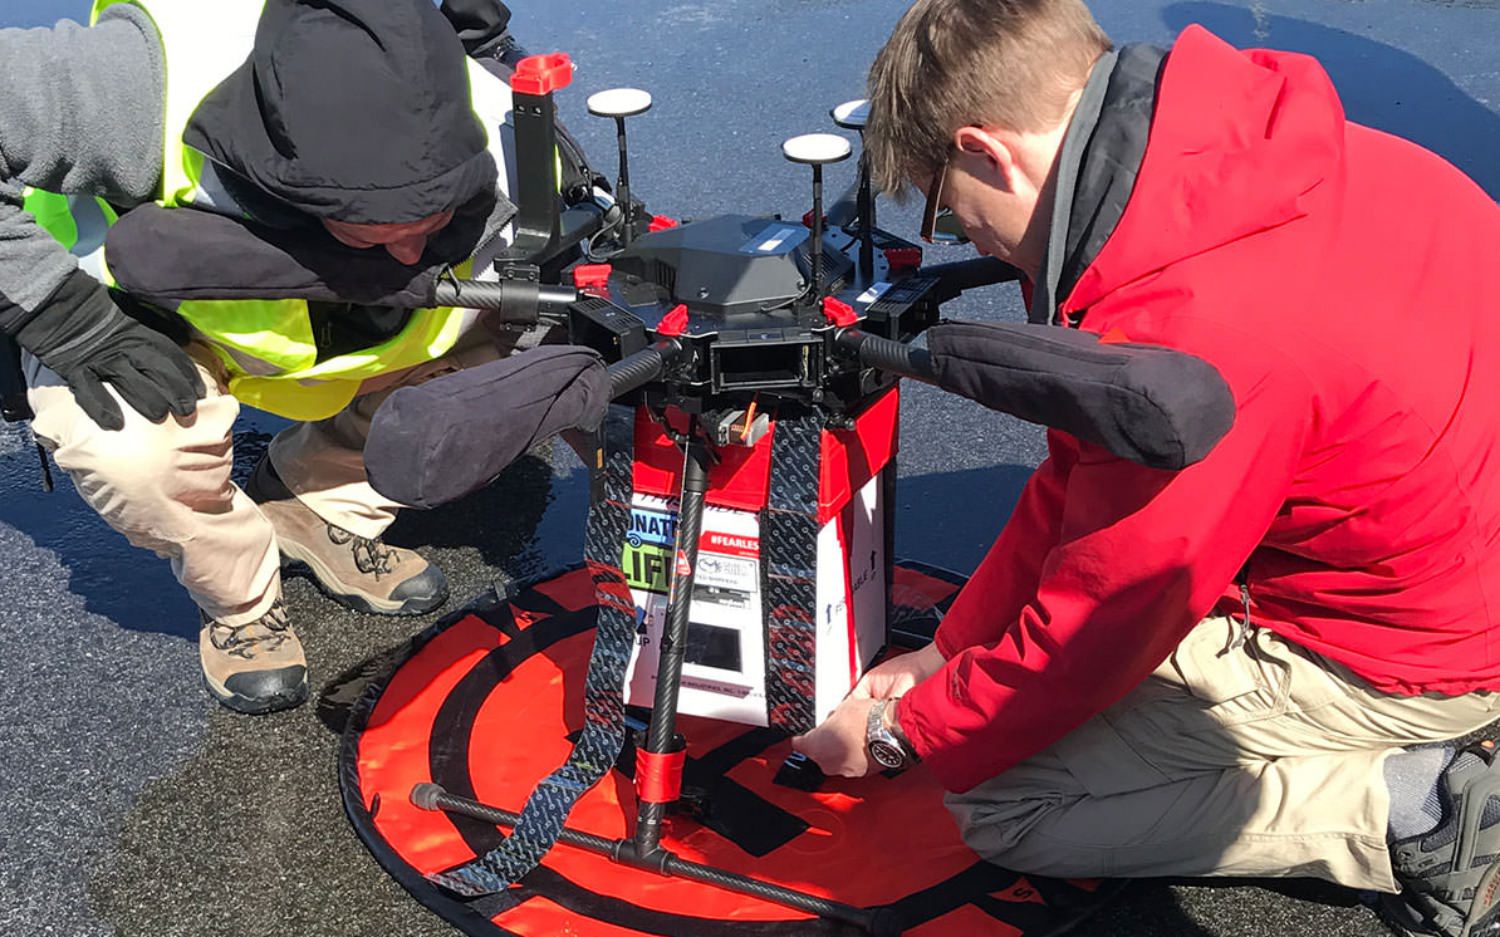 DJI Matrice 600 Pro successfully delivers kidney in Maryland test